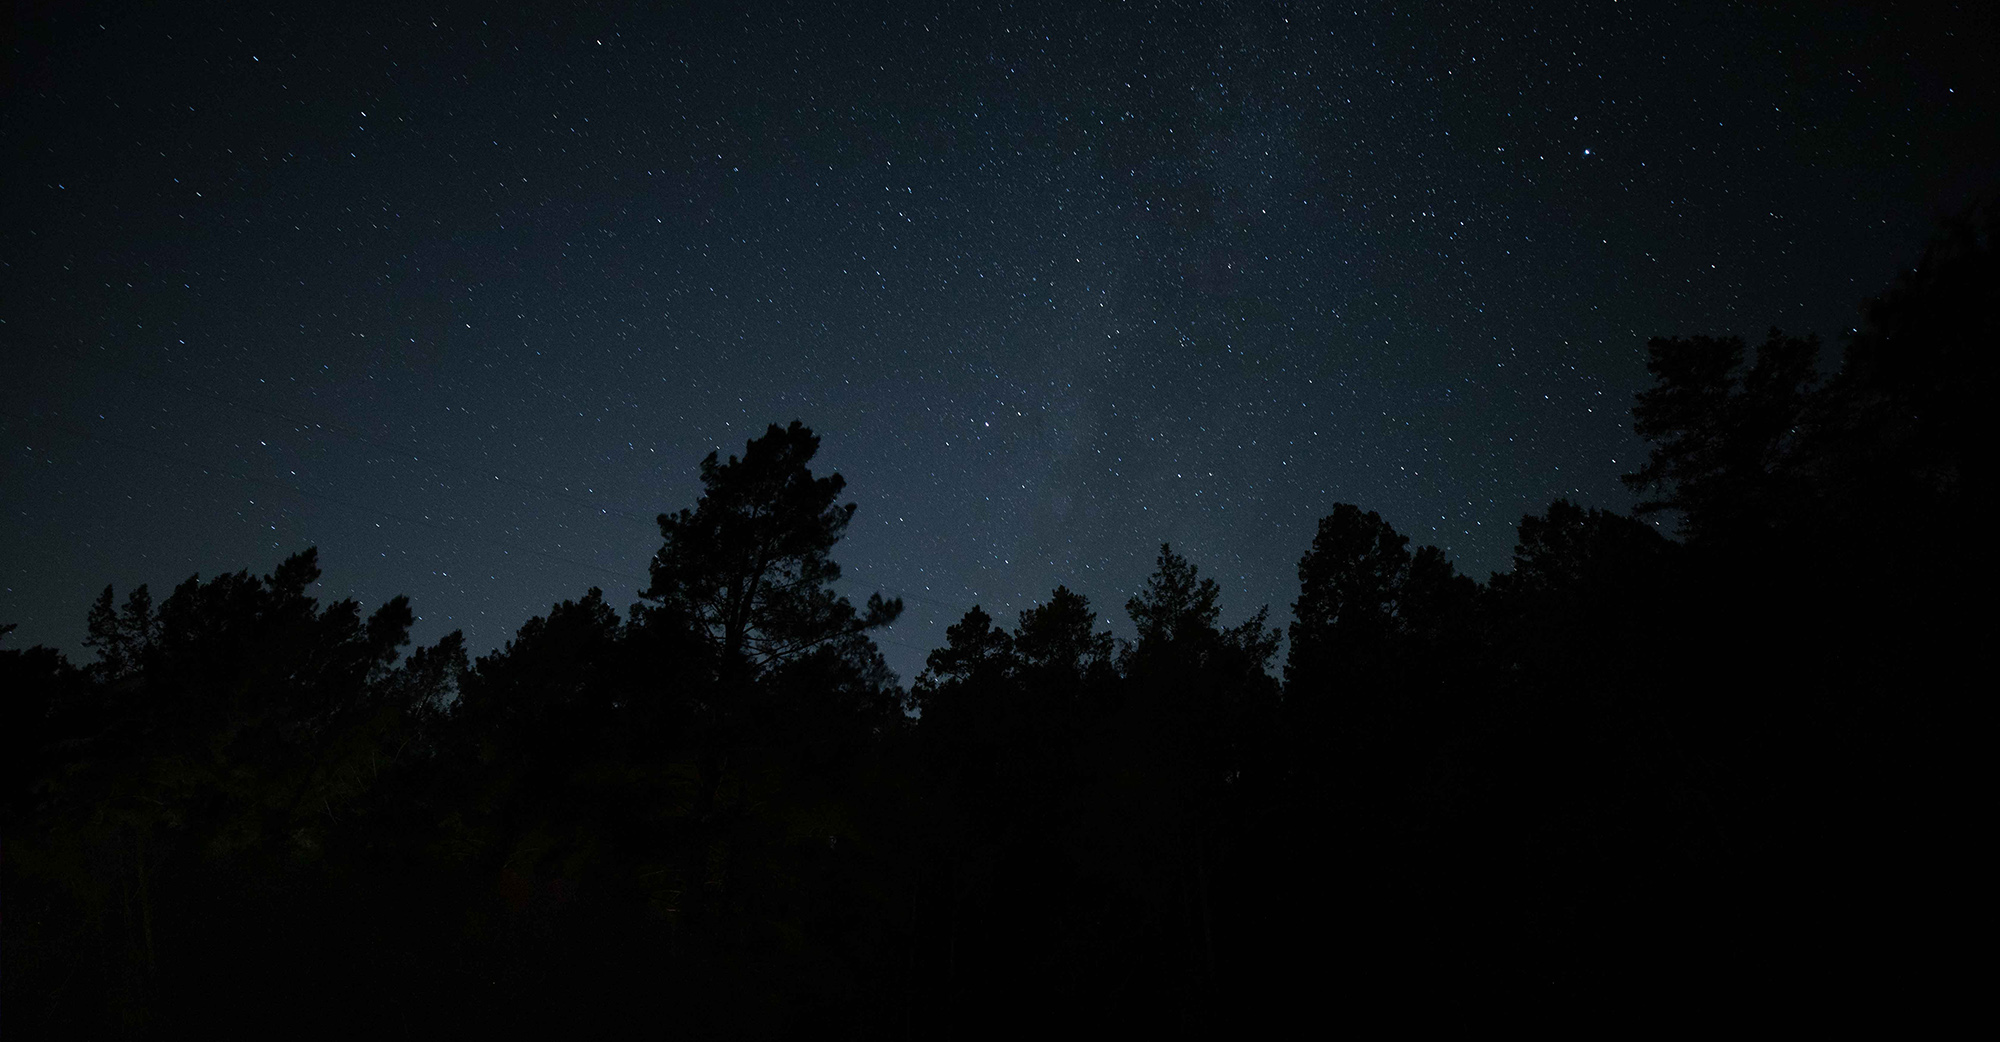 Nighttime starry sky with trees in the foreground